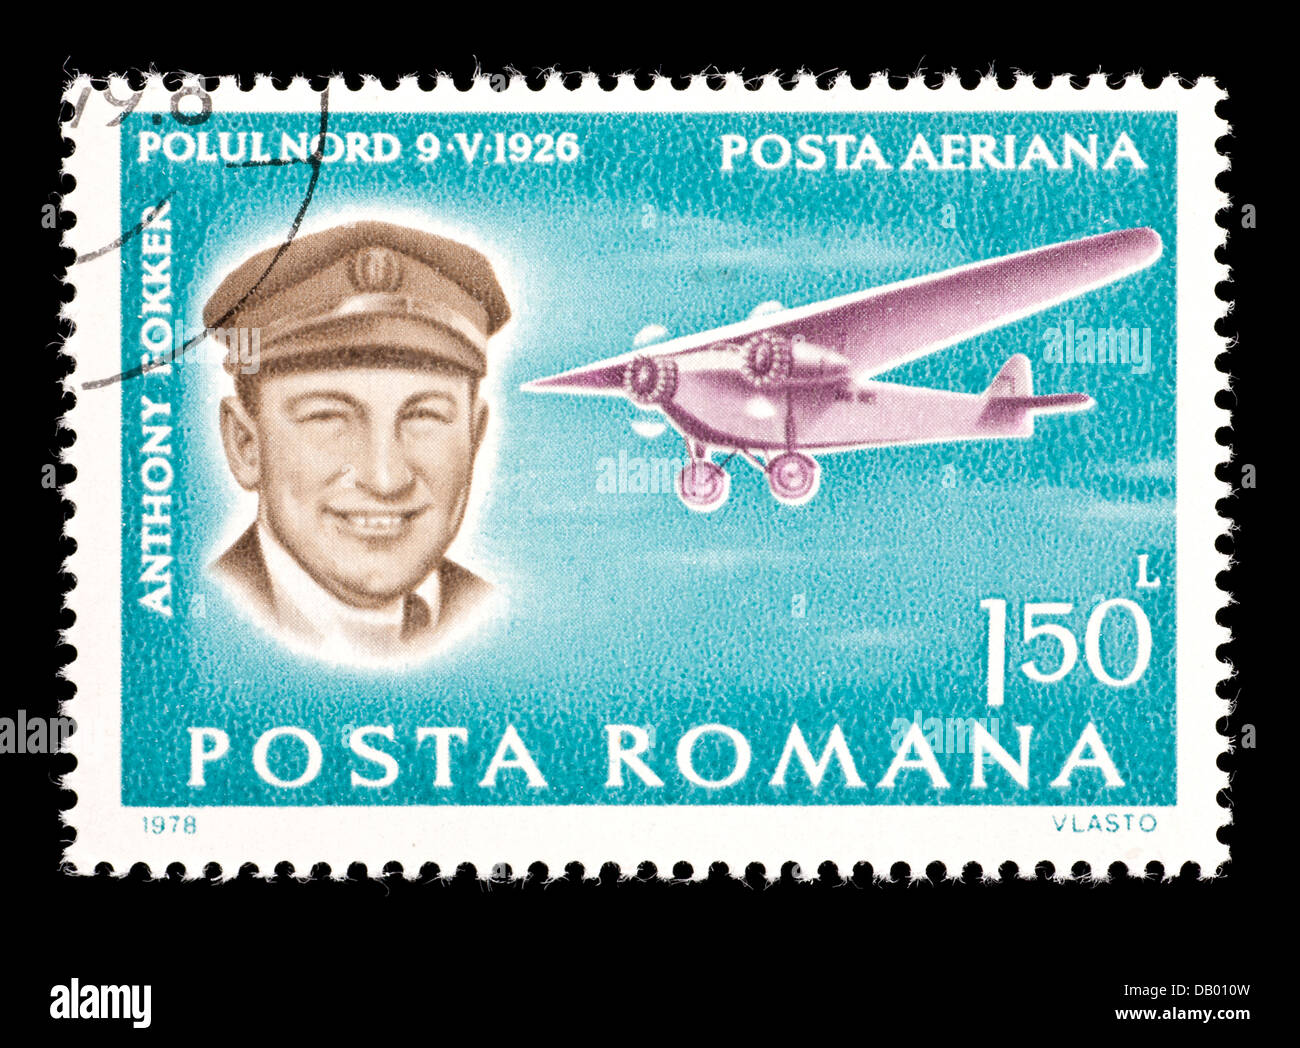 Postage stamp from Romania depicting Anthony Fokker and an early aircraft. Stock Photo